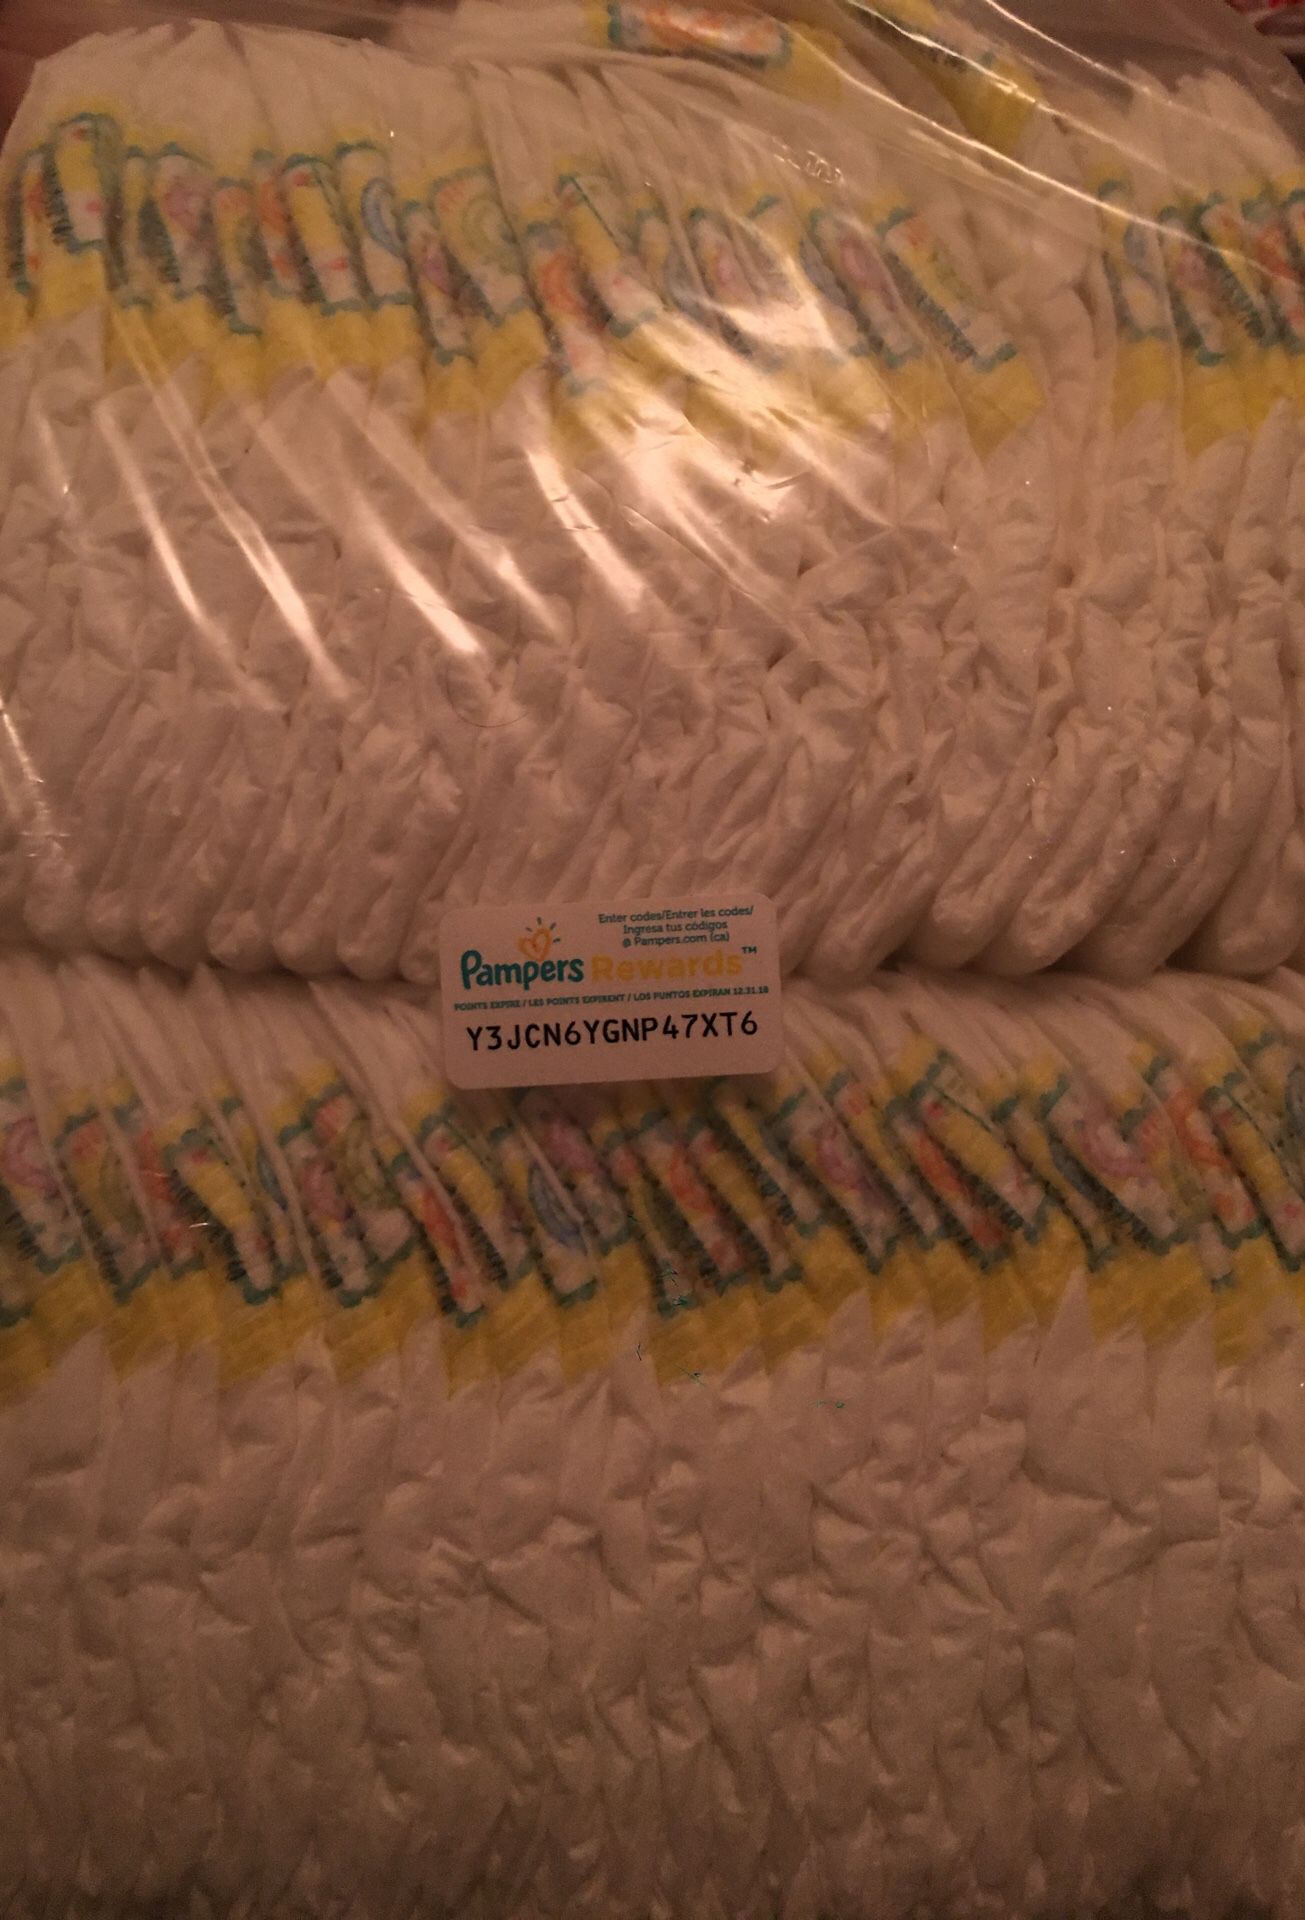 Pampers Newborn Diapers (48 count)